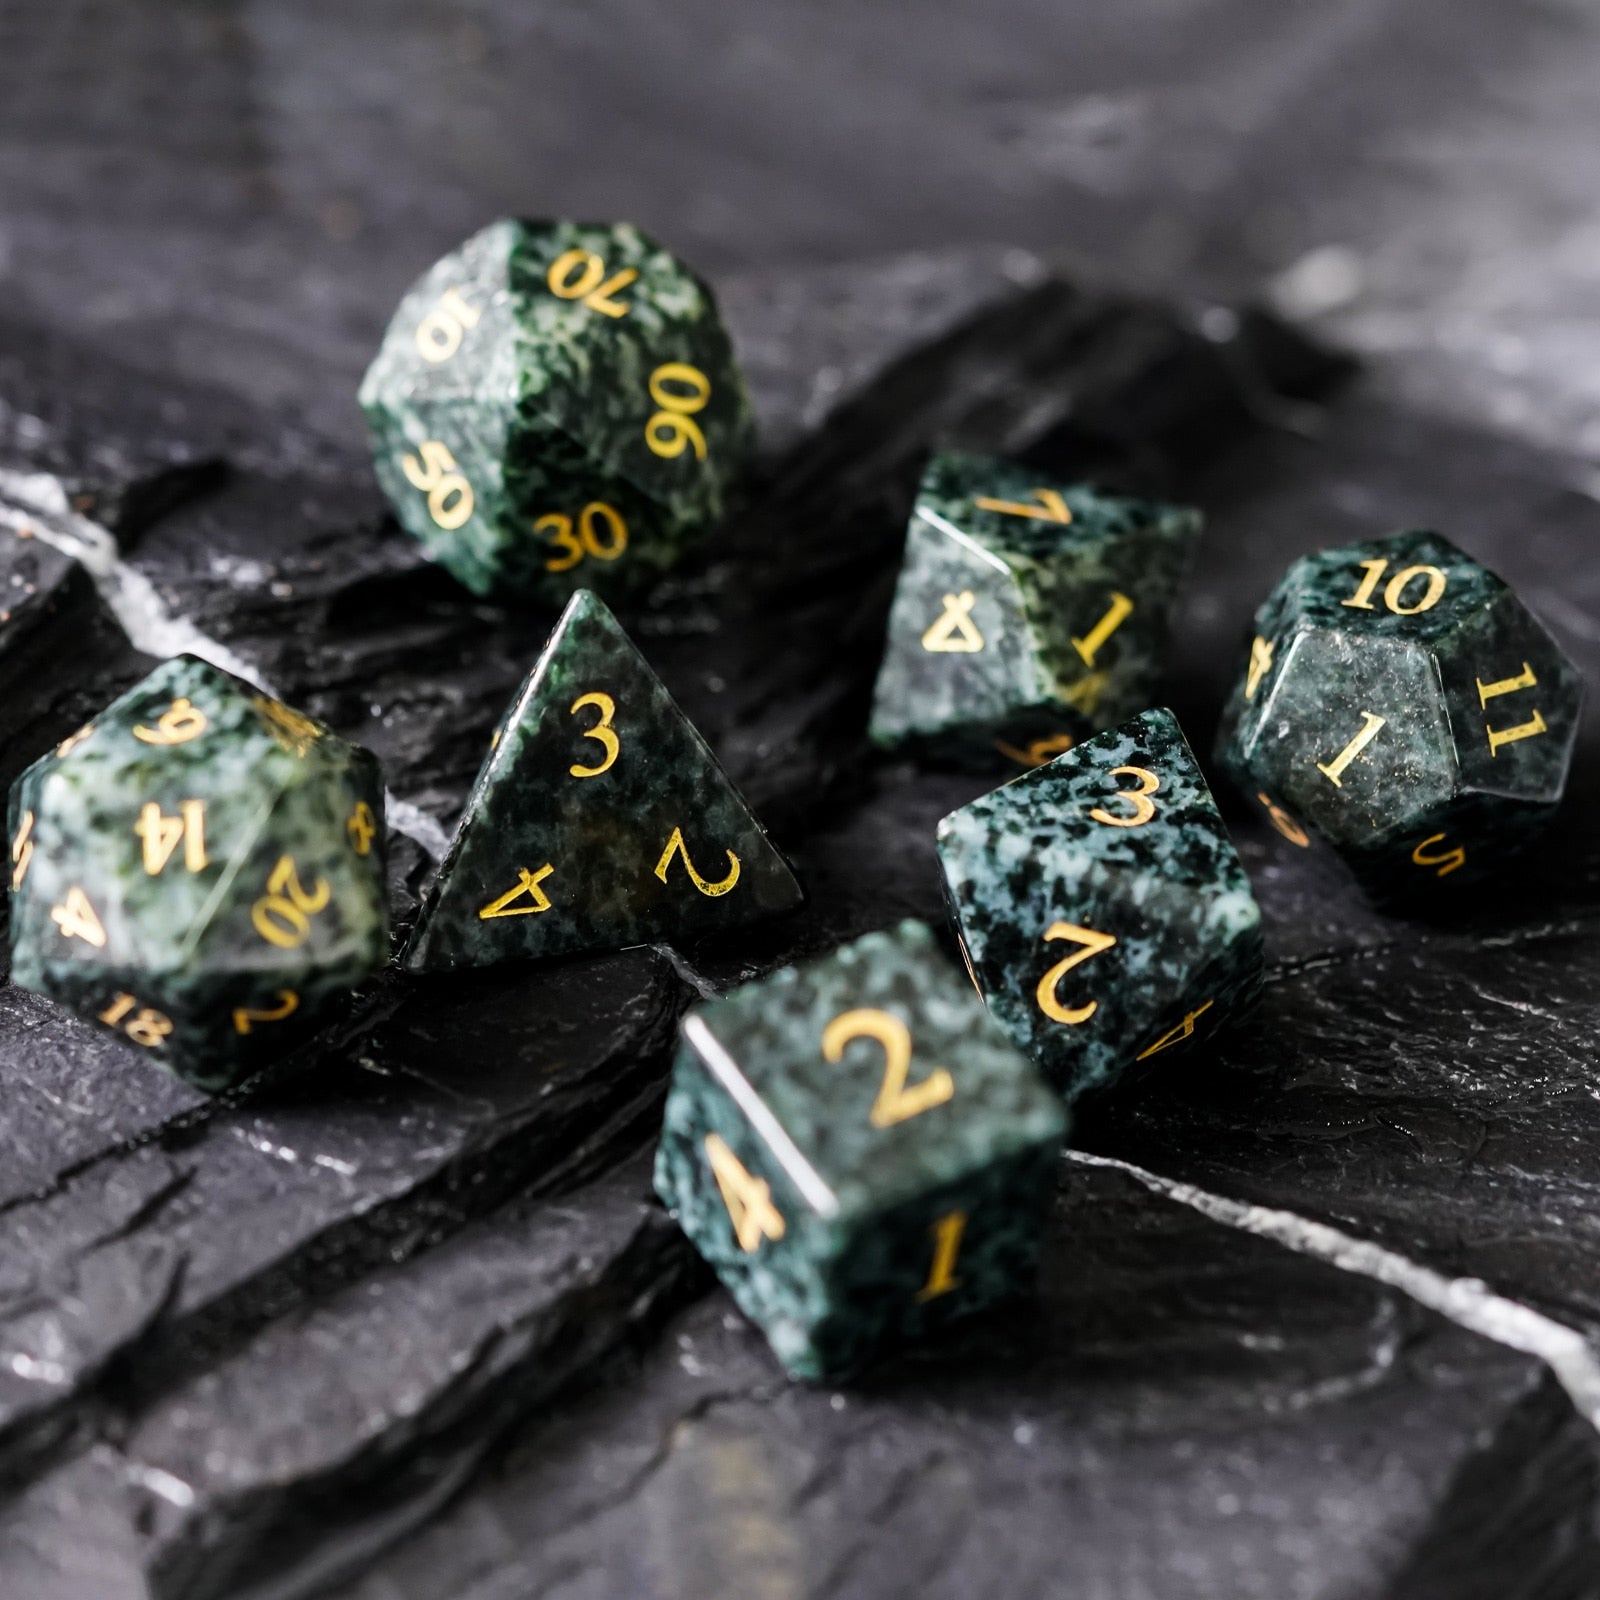 7 piece seaweed tangle stone dice set on obsidian background